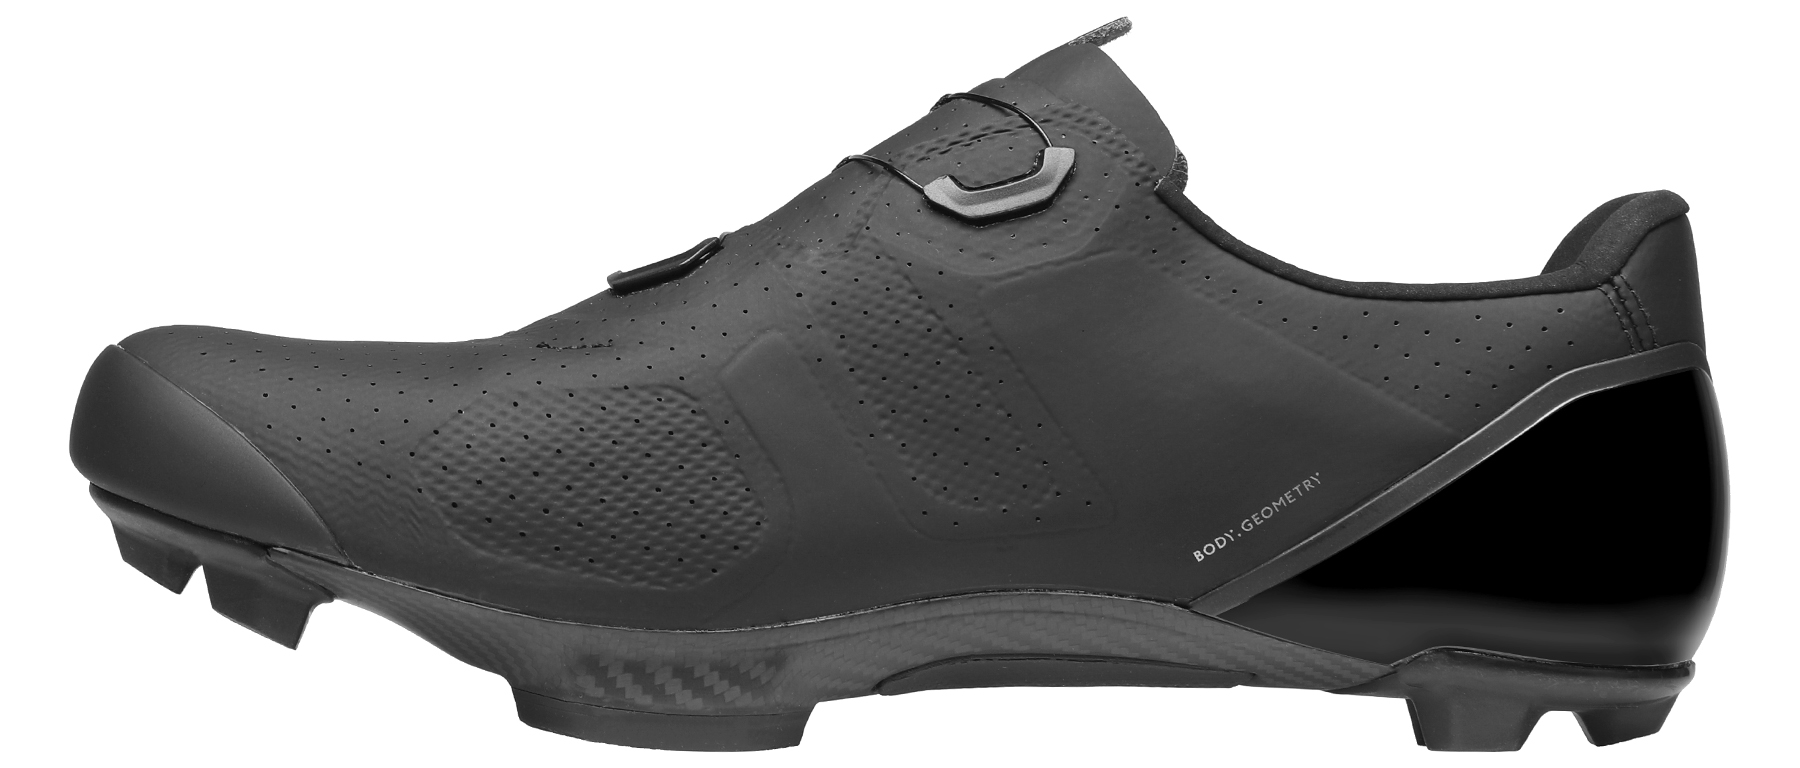 Specialized S-Works Recon Mountain Shoe